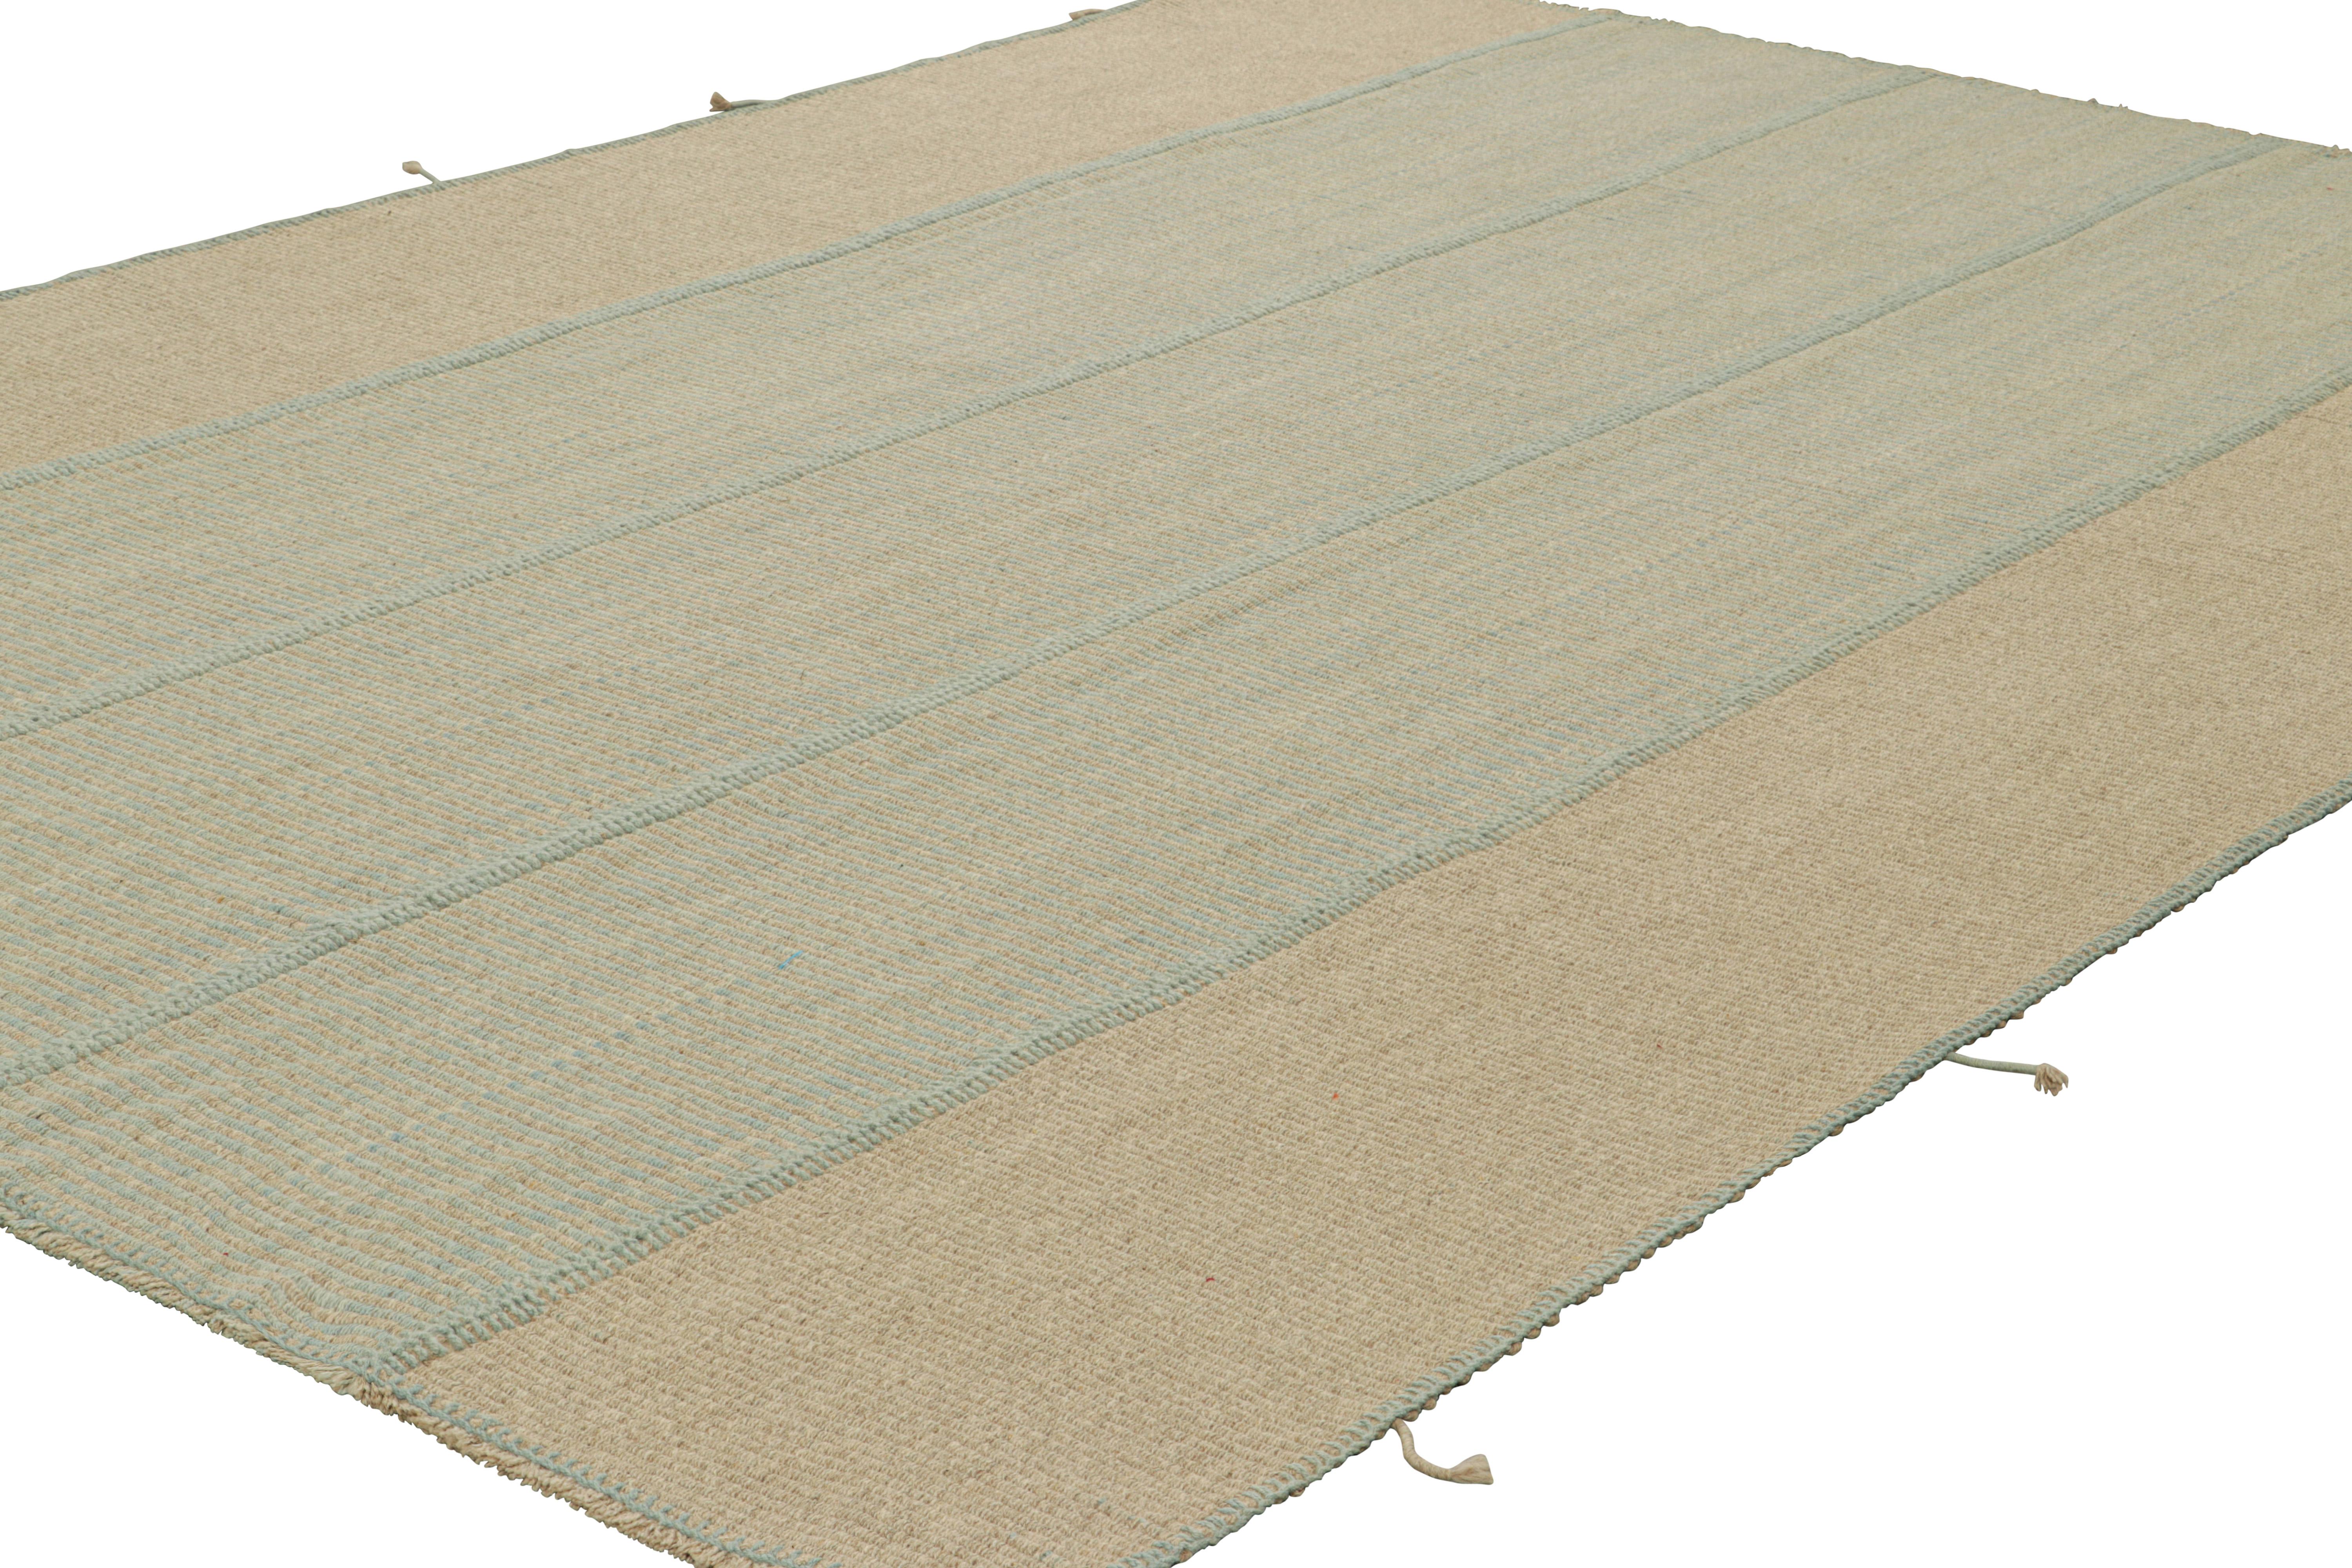 Afghan Rug & Kilim’s Contemporary Kilim in Beige and Blue Textural Stripes For Sale